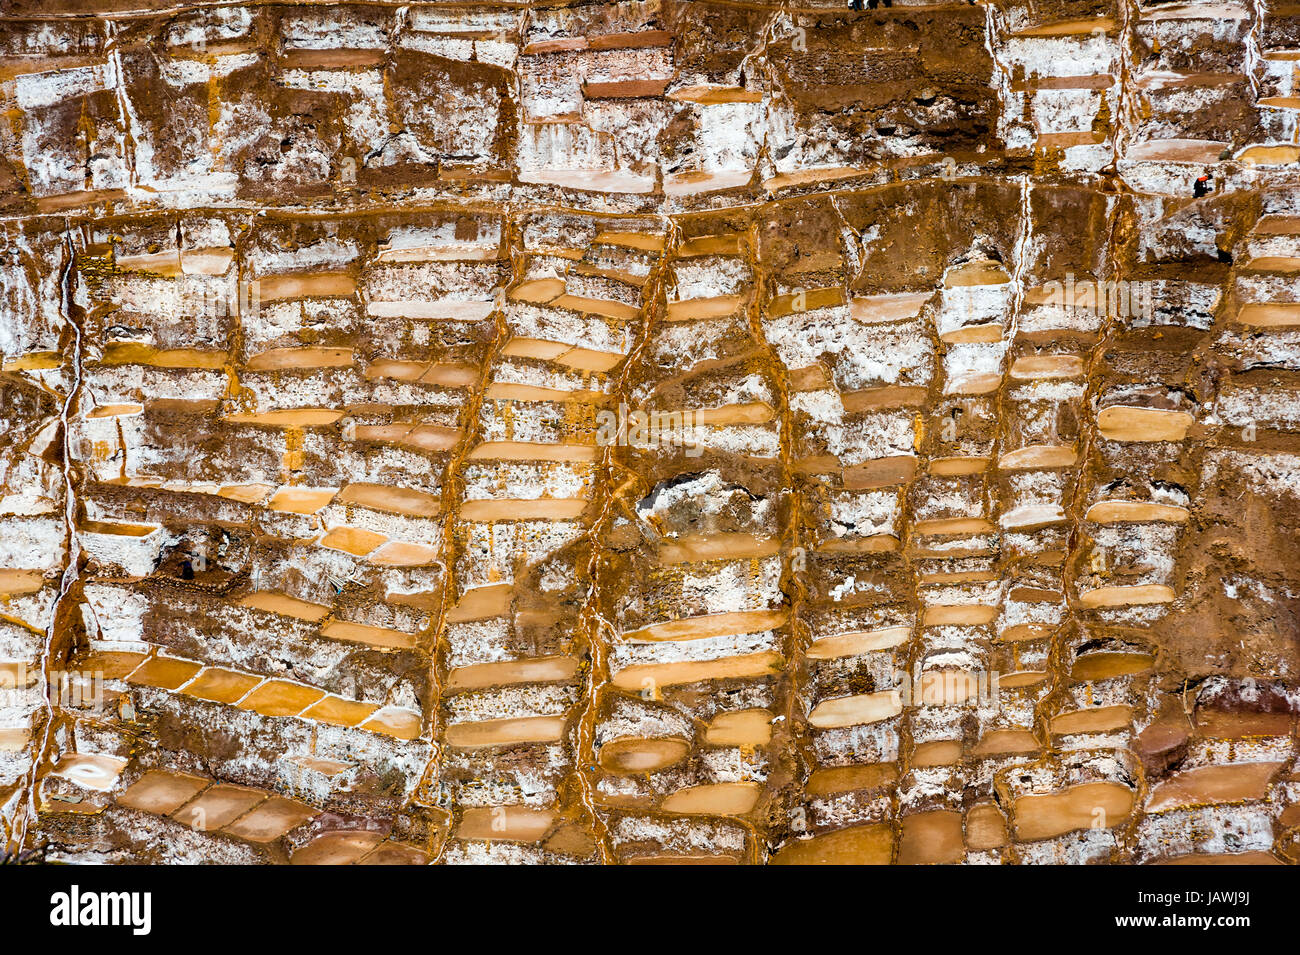 An Inca salt mine made up of salty spring water ponds evaporating. Stock Photo